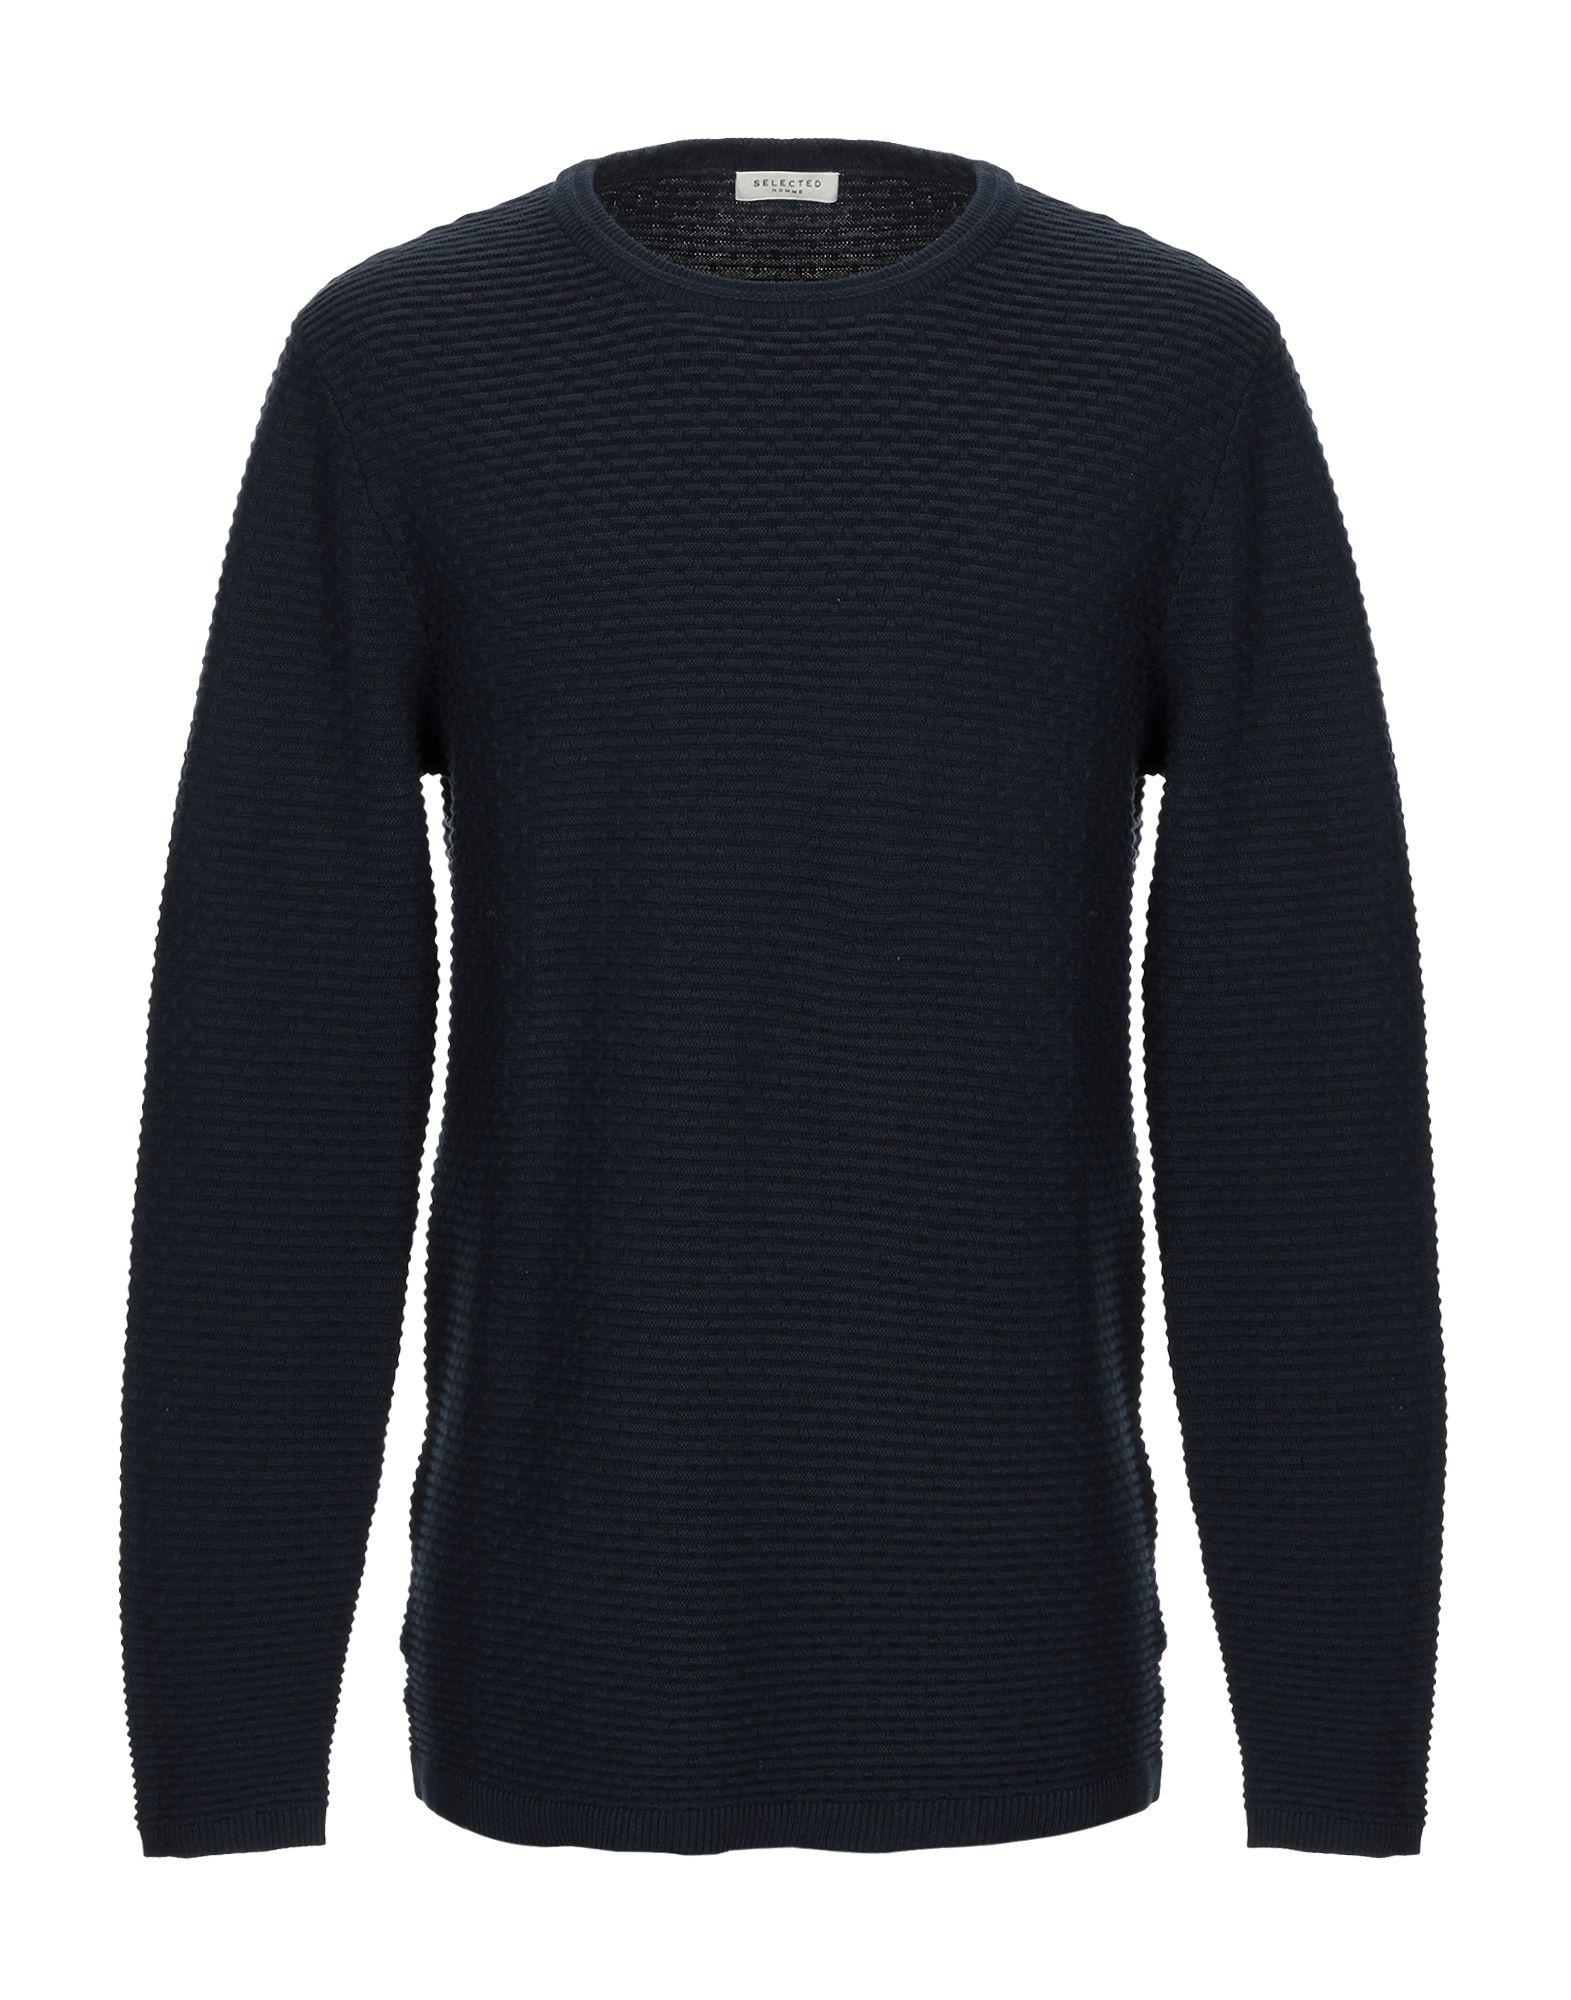 SELECTED Cotton Sweater in Dark Blue (Blue) for Men - Lyst